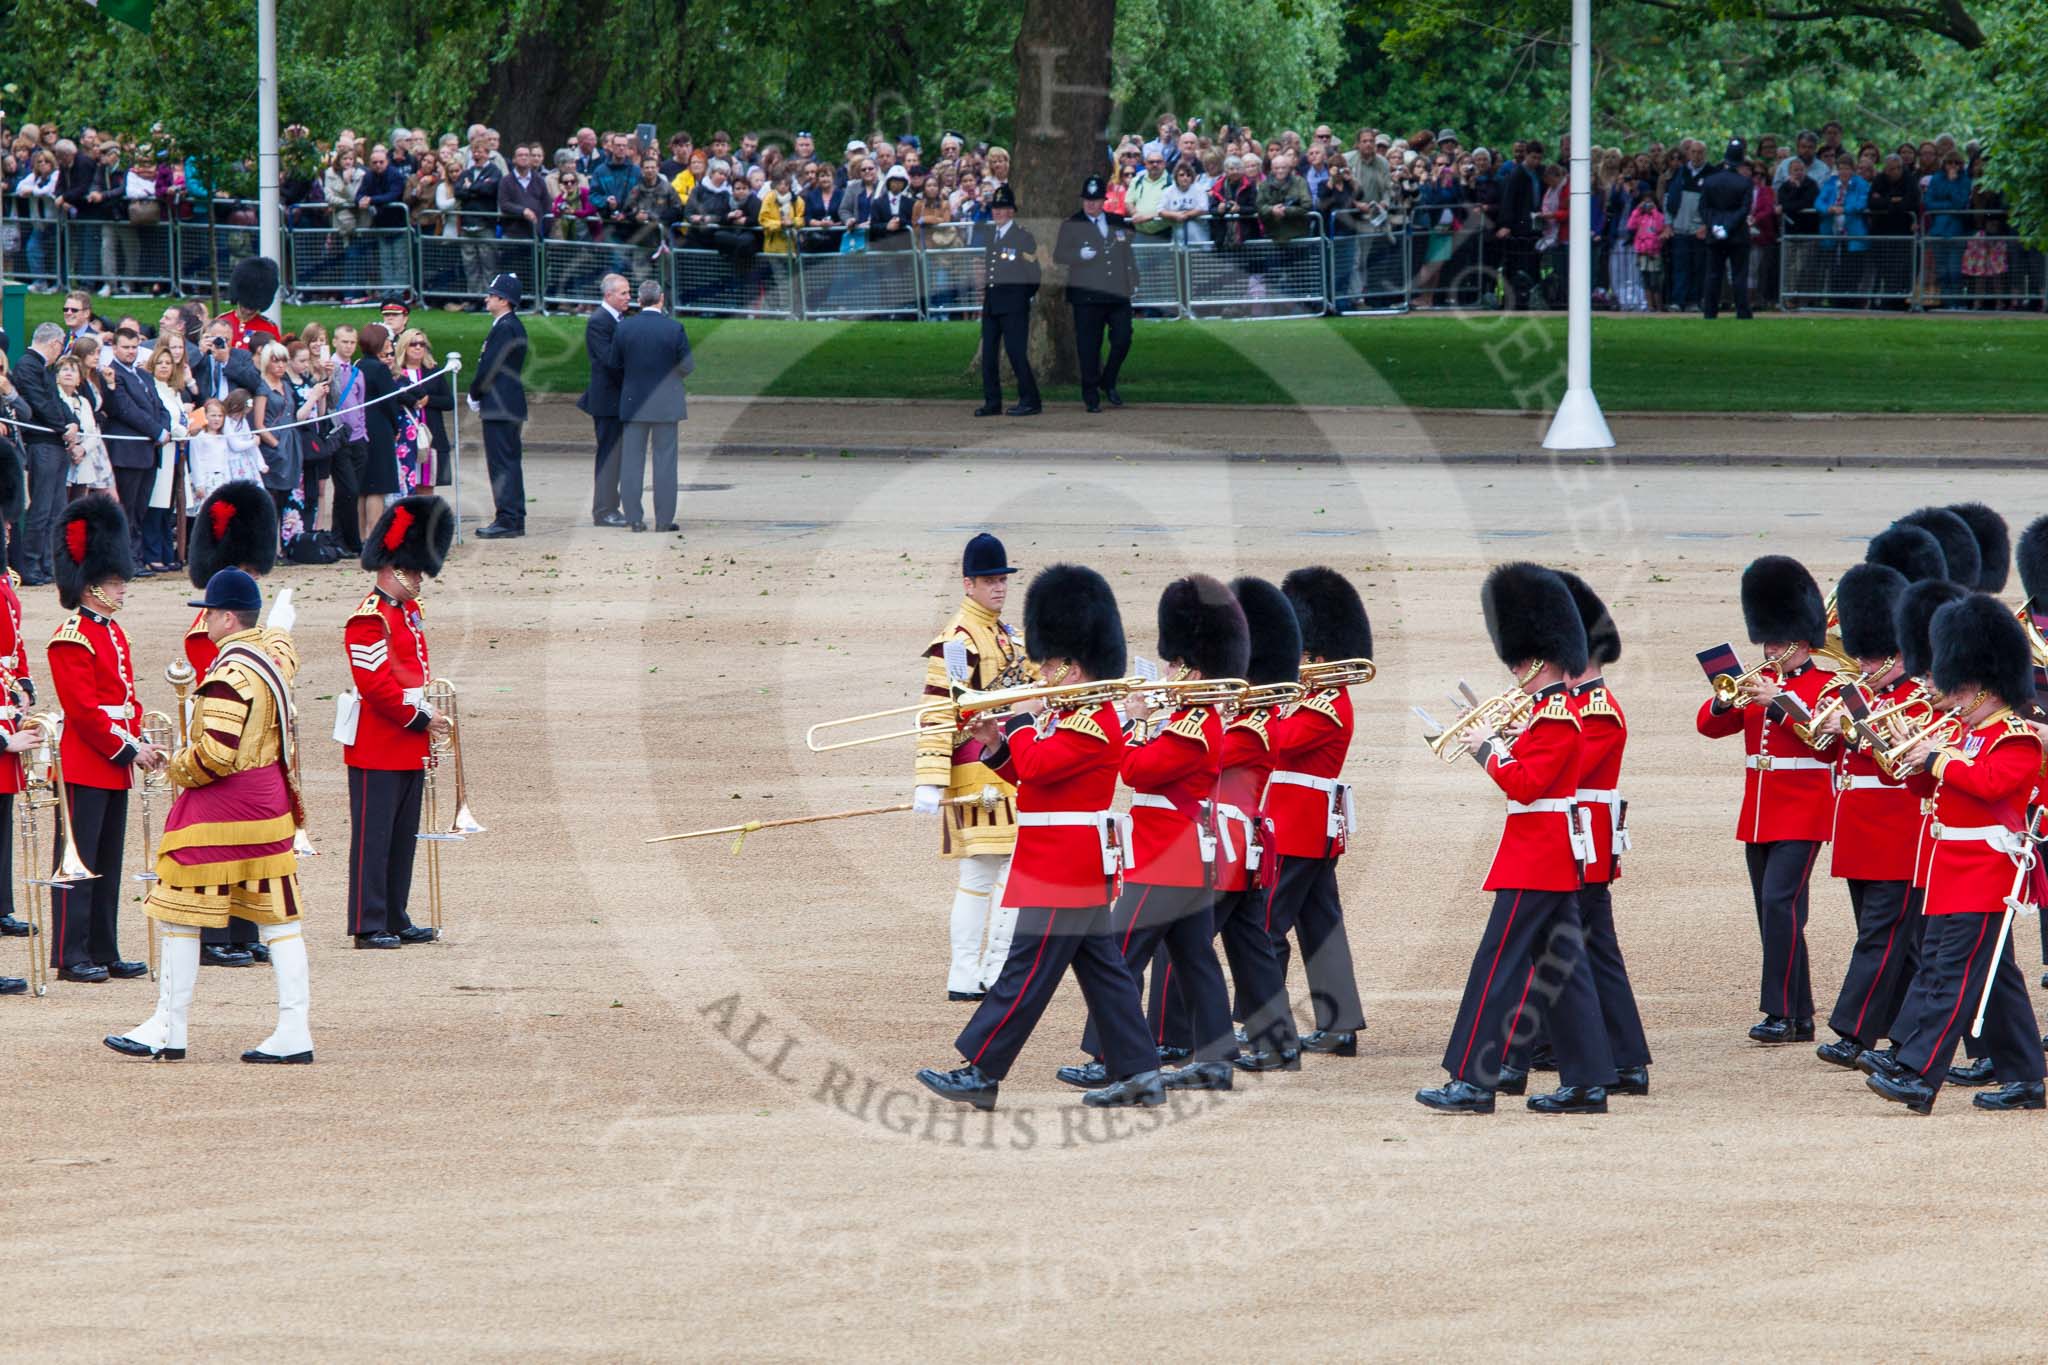 Trooping the Colour 2013: Drum Major Tony Taylor, Coldstream Guards, leading the Band of the Irish Guards past the Band of the Coldstream Guards that had arrived before. Image #58, 15 June 2013 10:16 Horse Guards Parade, London, UK